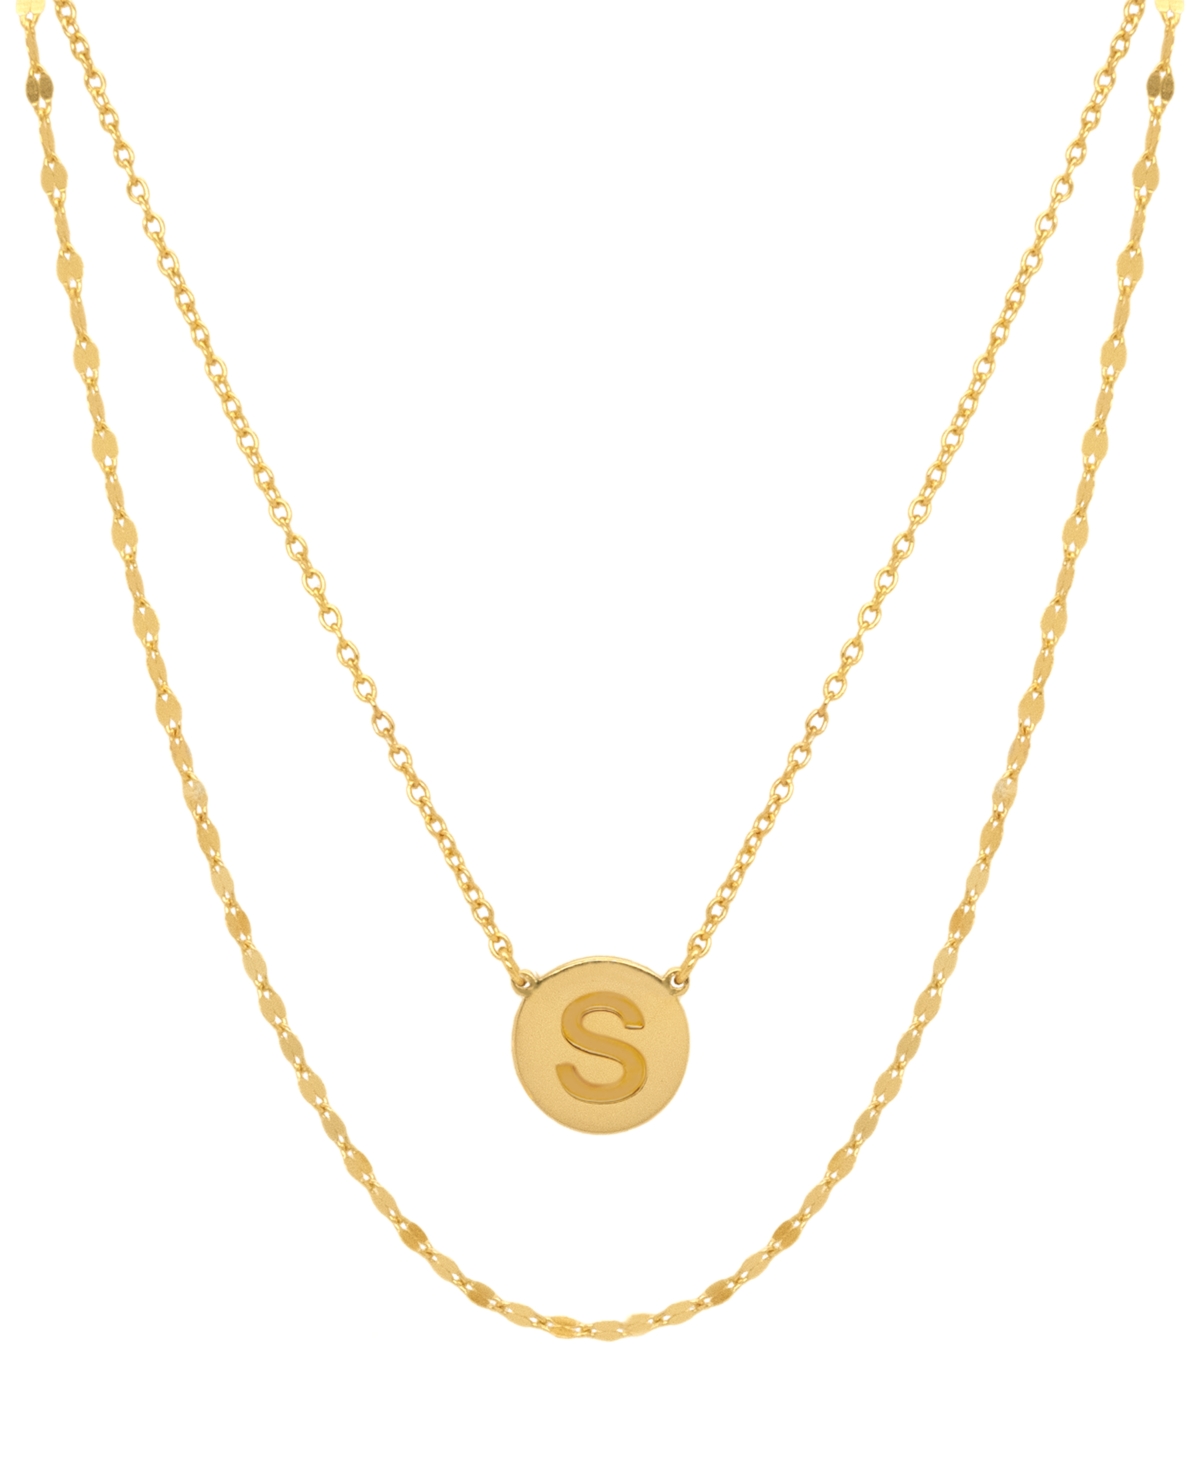 Giani Bernini Initial Disc Layered Pendant Necklace In 18k Gold-plated Sterling Silver, Created For Macy's